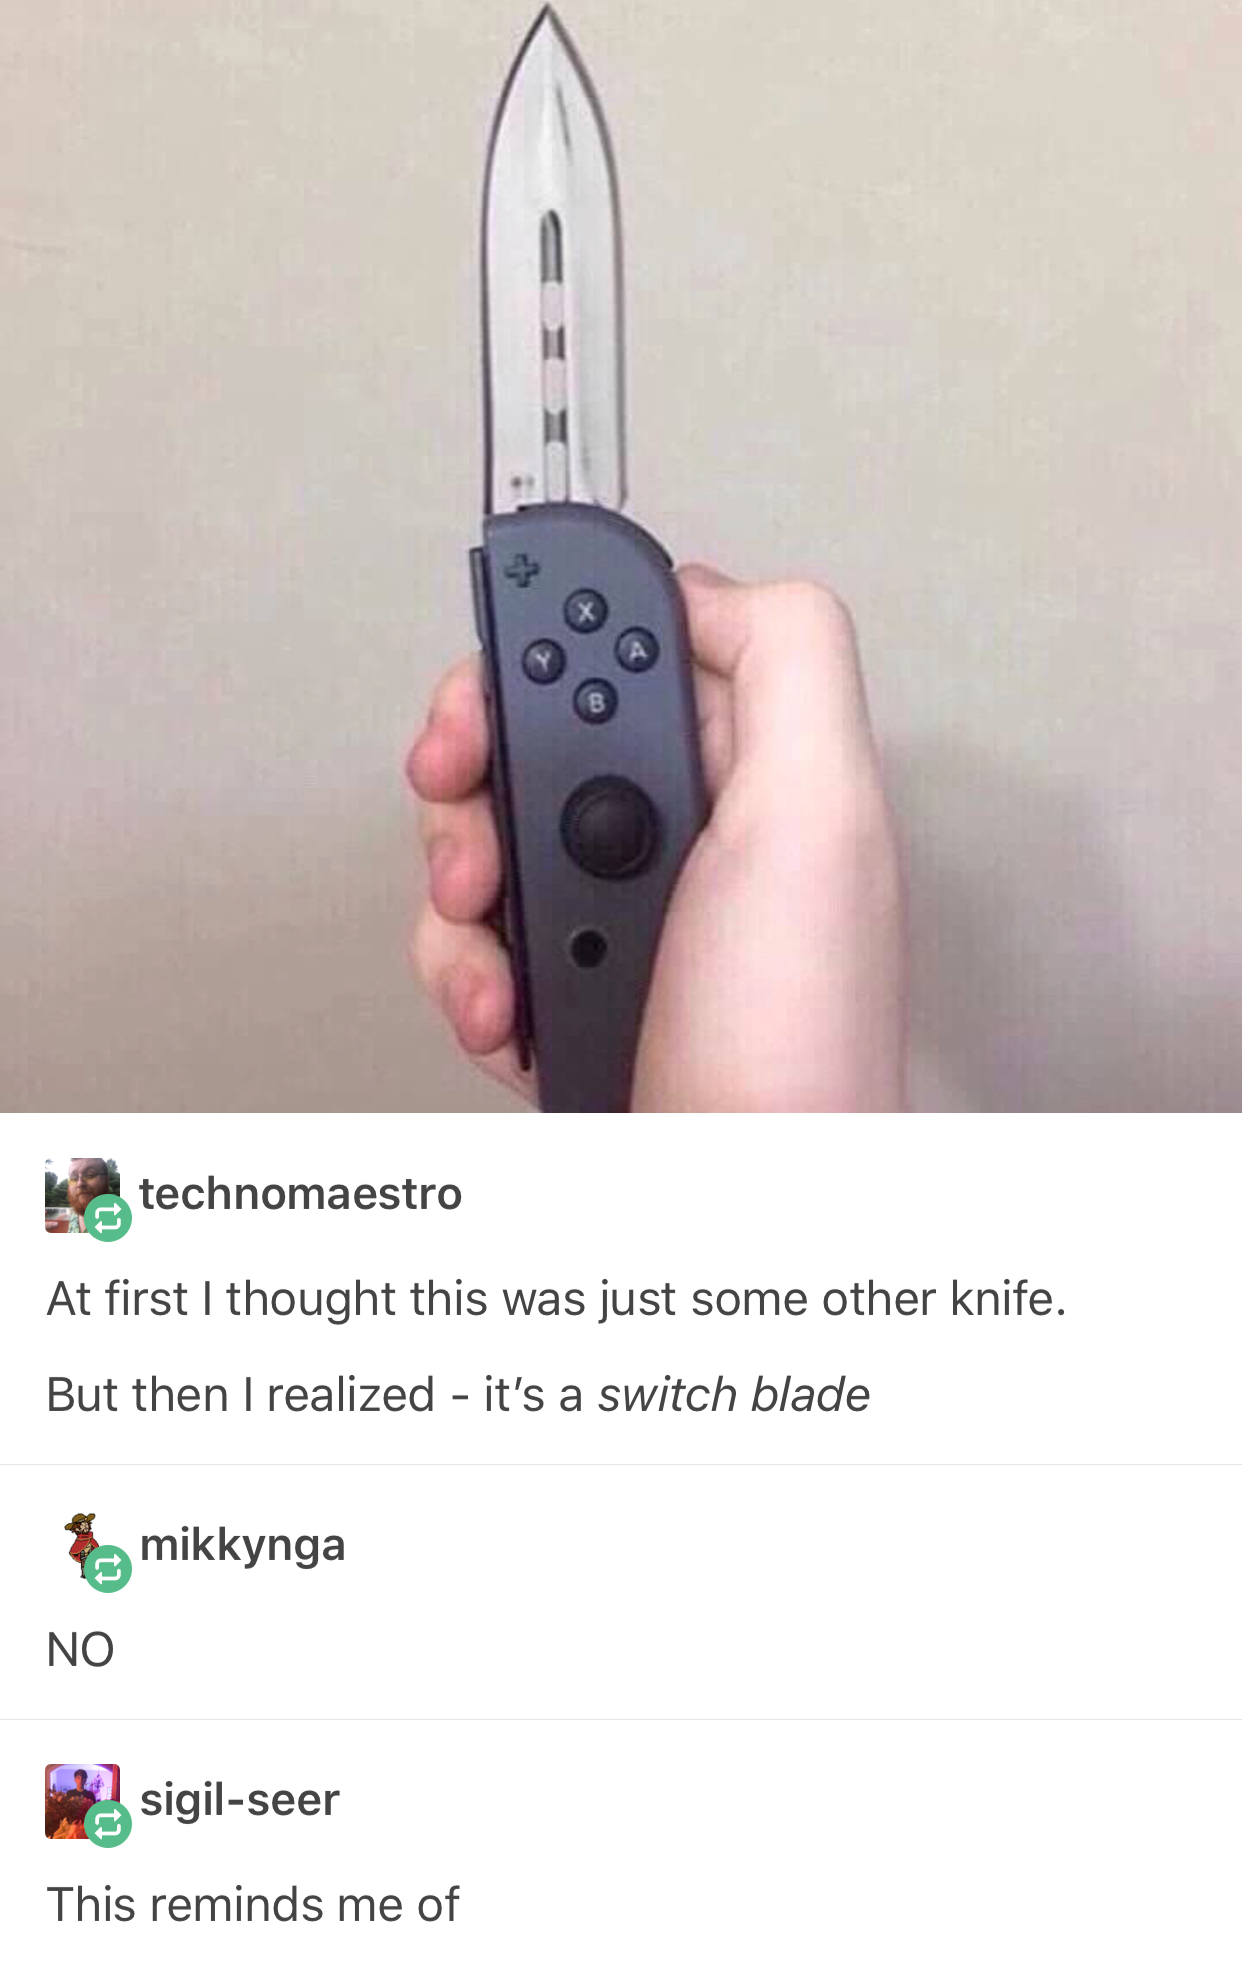 nintendo switch blade meme - technomaestro At first I thought this was just some other knife. But then I realized it's a switch blade mikkynga No P sigilseer This reminds me of